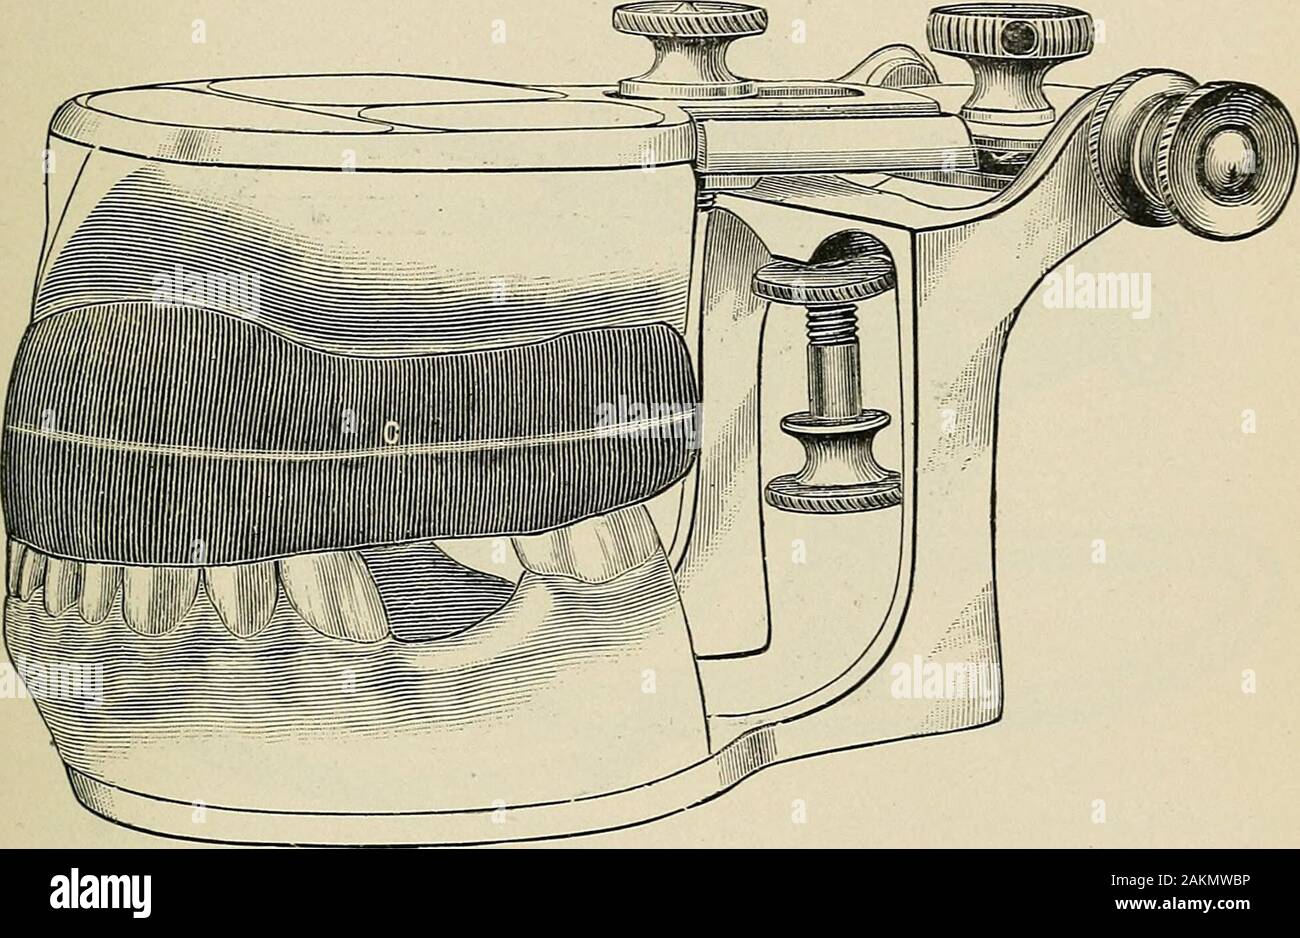 A practical treatise on mechanical dentistry . ving been previously securedfrom a wax or modeling compound impression) should be secured inthe articulator as illustrated in Fig. 102. Articulators.—Various articulators have been devised. Fig.103 illustrates one of the simpler forms, while a very ingenious andnovel device has been brought to the notice of the profession byDr. W. G. A. Bonwill, to which we give considerable space. Theinventor has characterized it as the Anatomical Articulator, anddescribes it as follows: ENTIRE DENTURES ATTACHED TO SWAGED PLATE-BASE. 243 It is modeled on the same Stock Photo